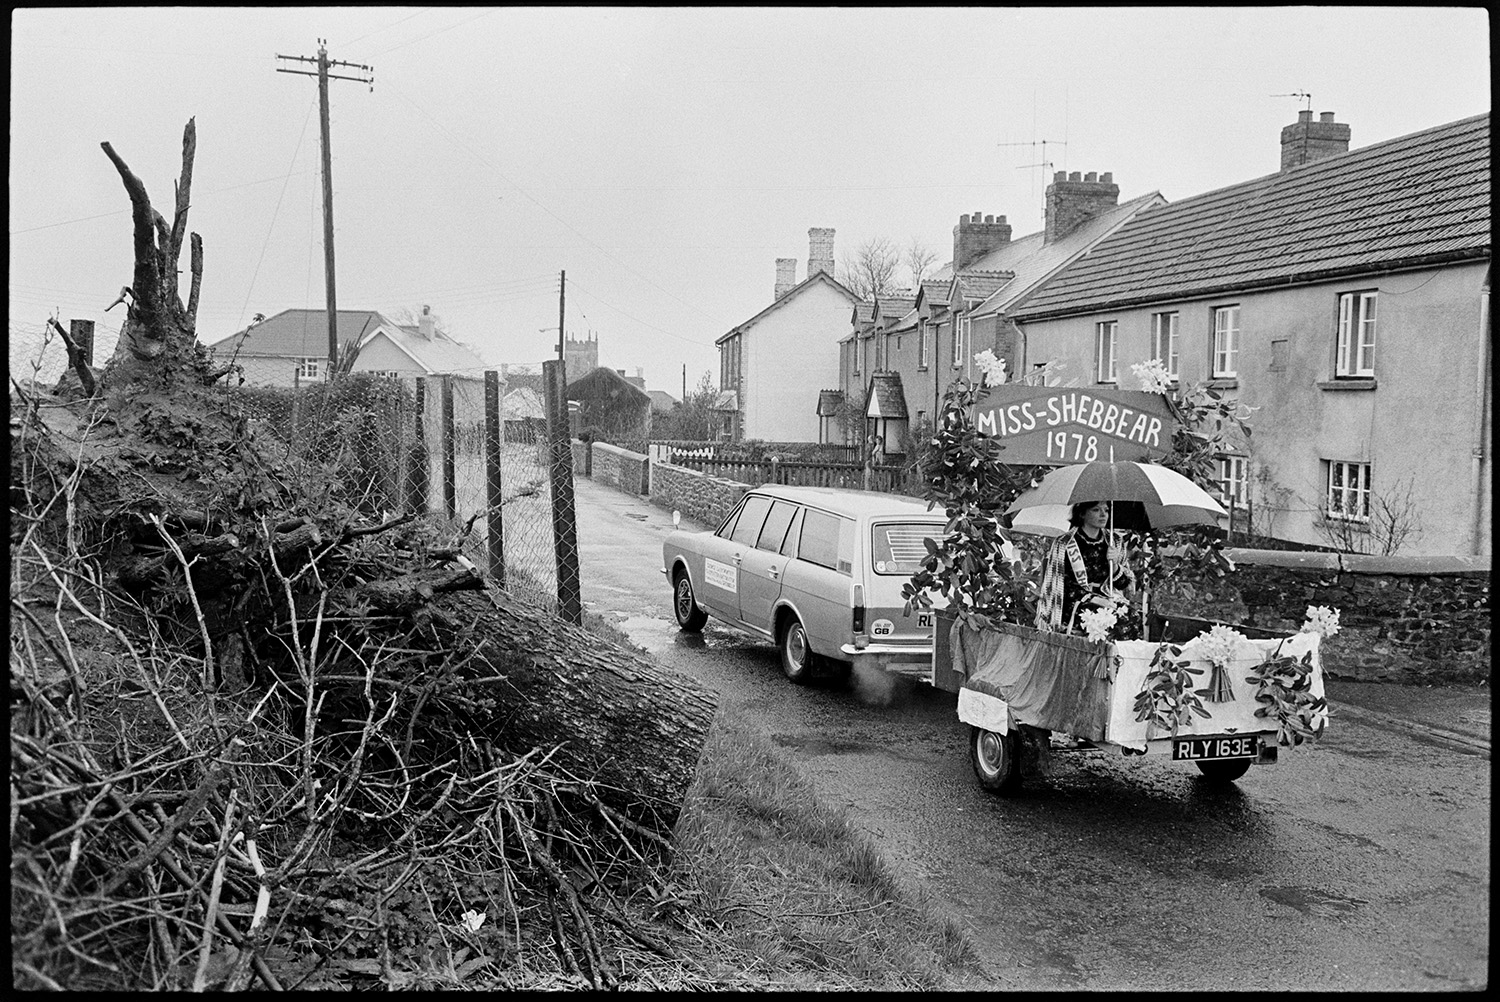 Carnival procession with Queen on decorated float, rain, spectators and Brass Band.
[A car pulling a trailer with Miss-Shebbear sitting under an umbrella driving along a road for Shebbear Carnival.]